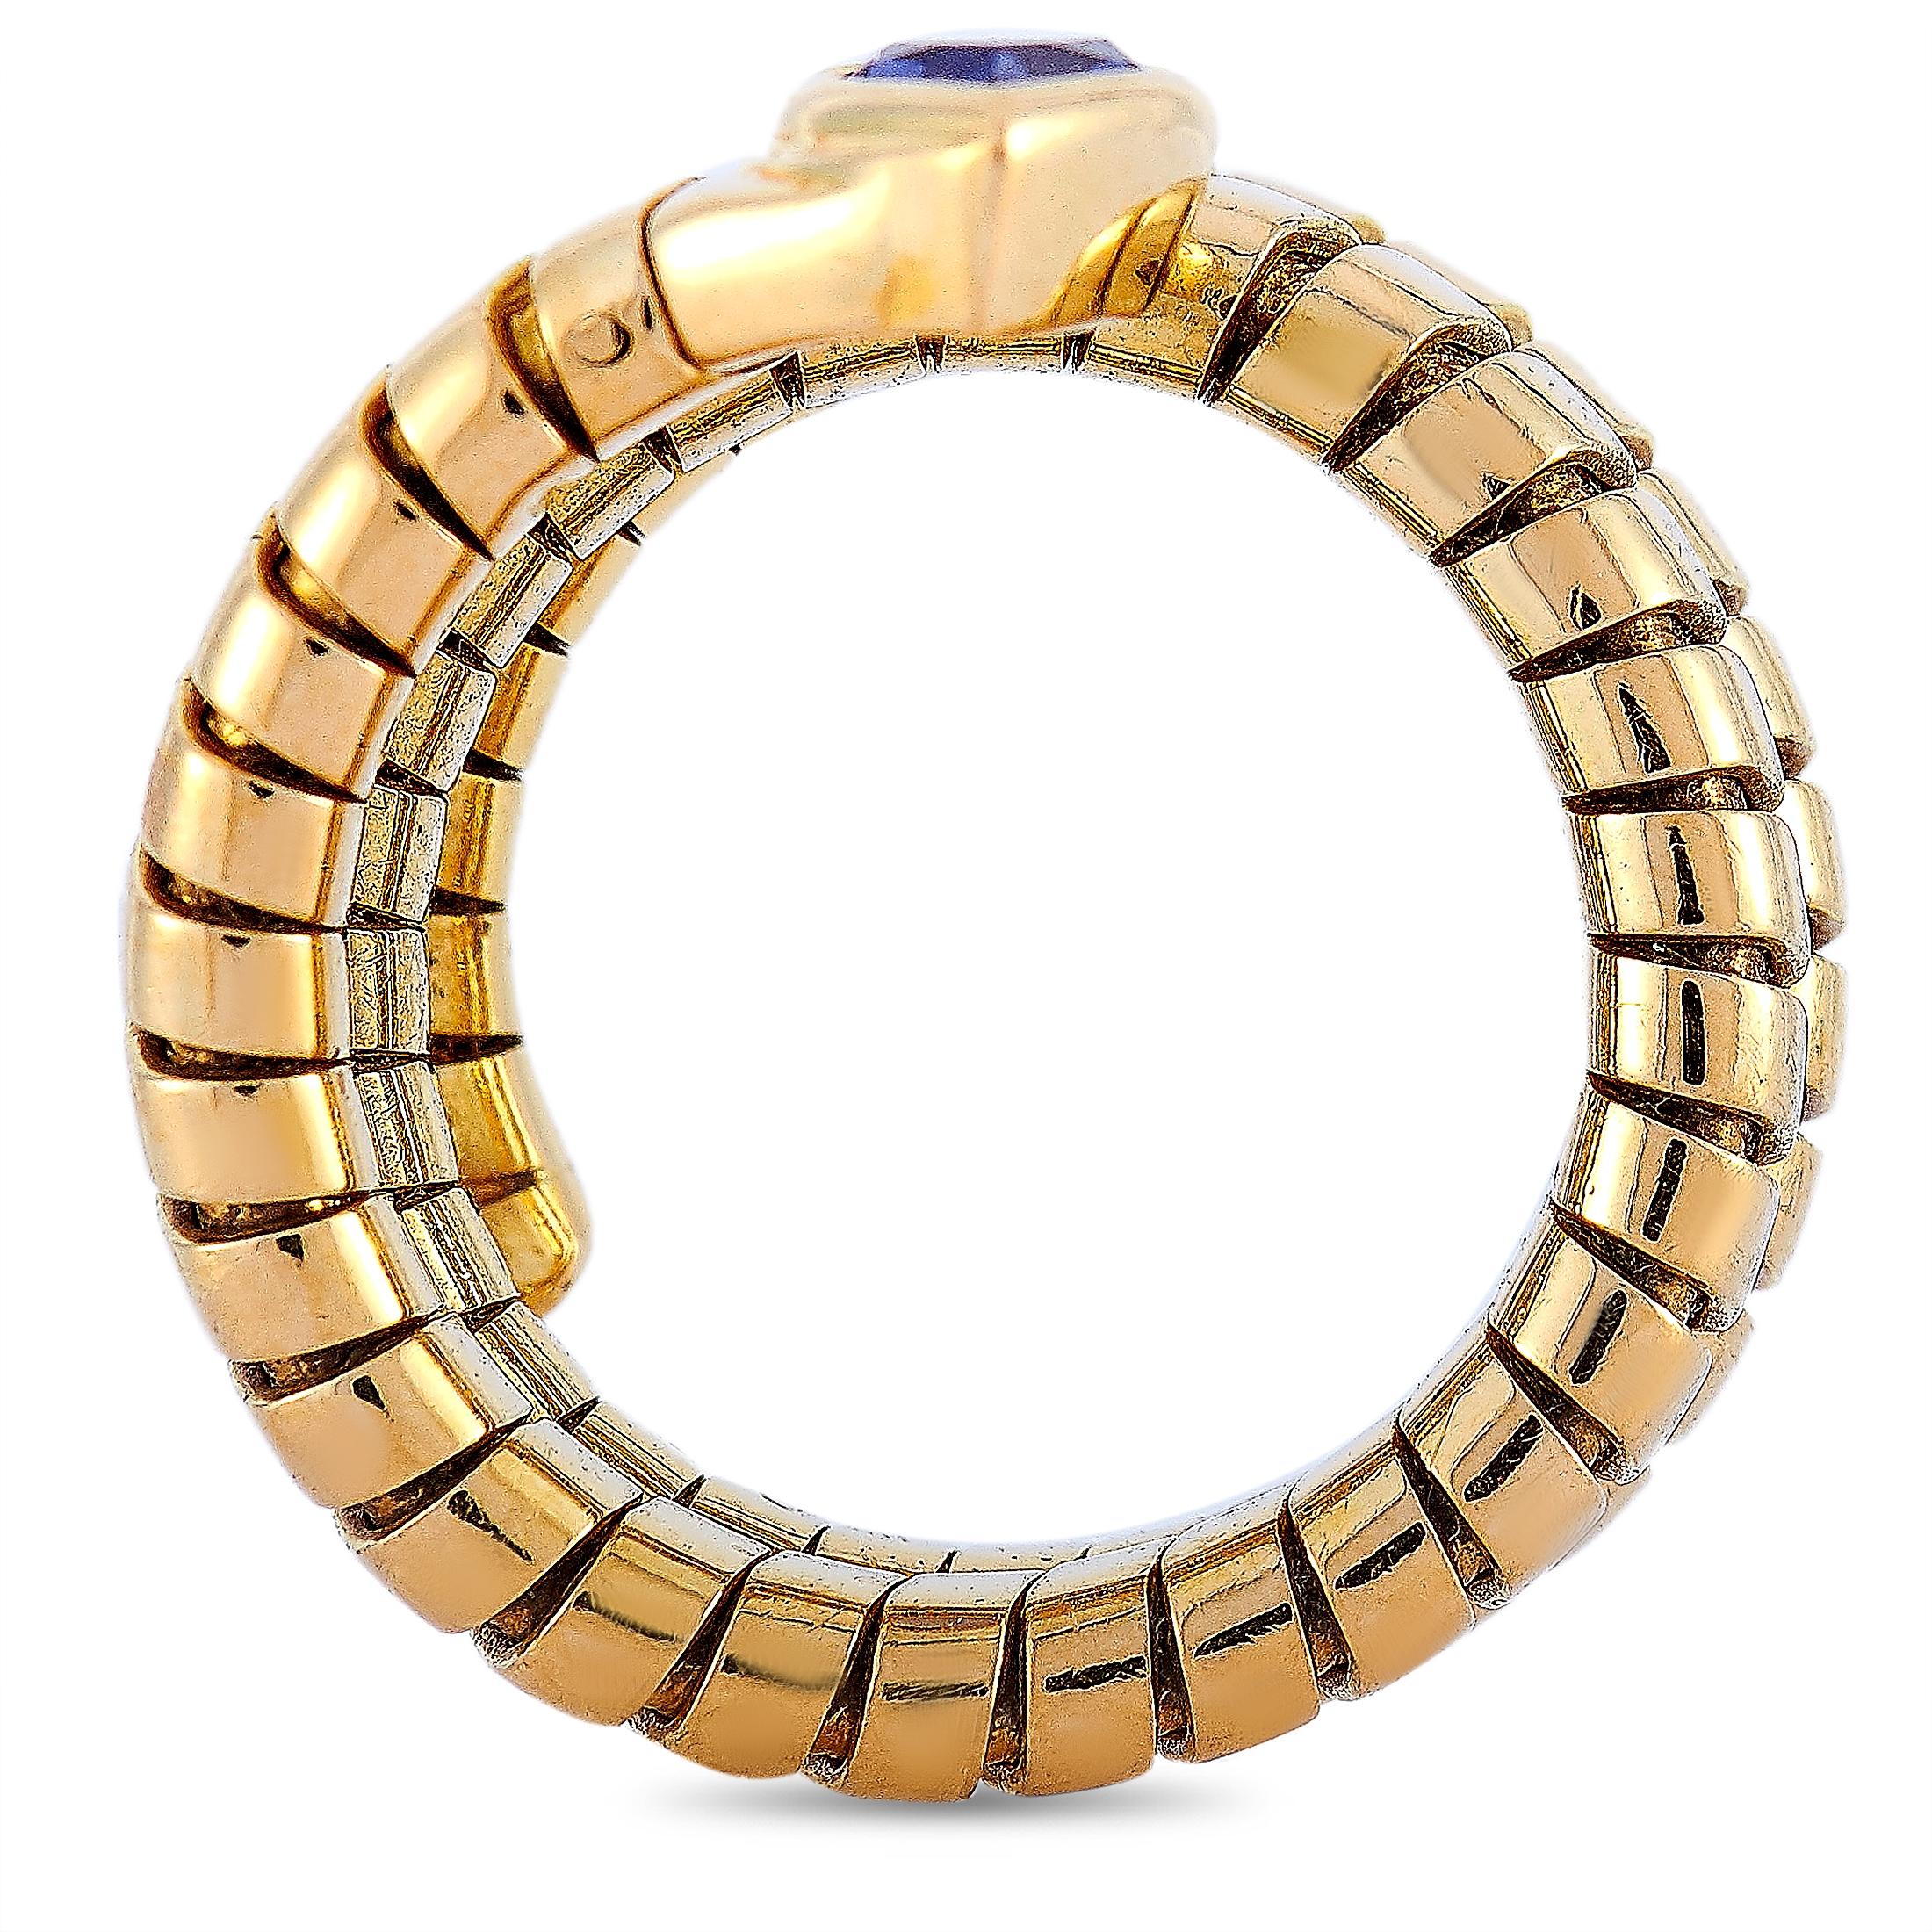 This Bvlgari tubogas ring is made of 18K yellow gold and embellished with an iolite. The ring weighs 15.6 grams and boasts band thickness of 8 mm and top height of 4 mm, while top dimensions measure 7 by 8 mm.
 
 Offered in estate condition, this